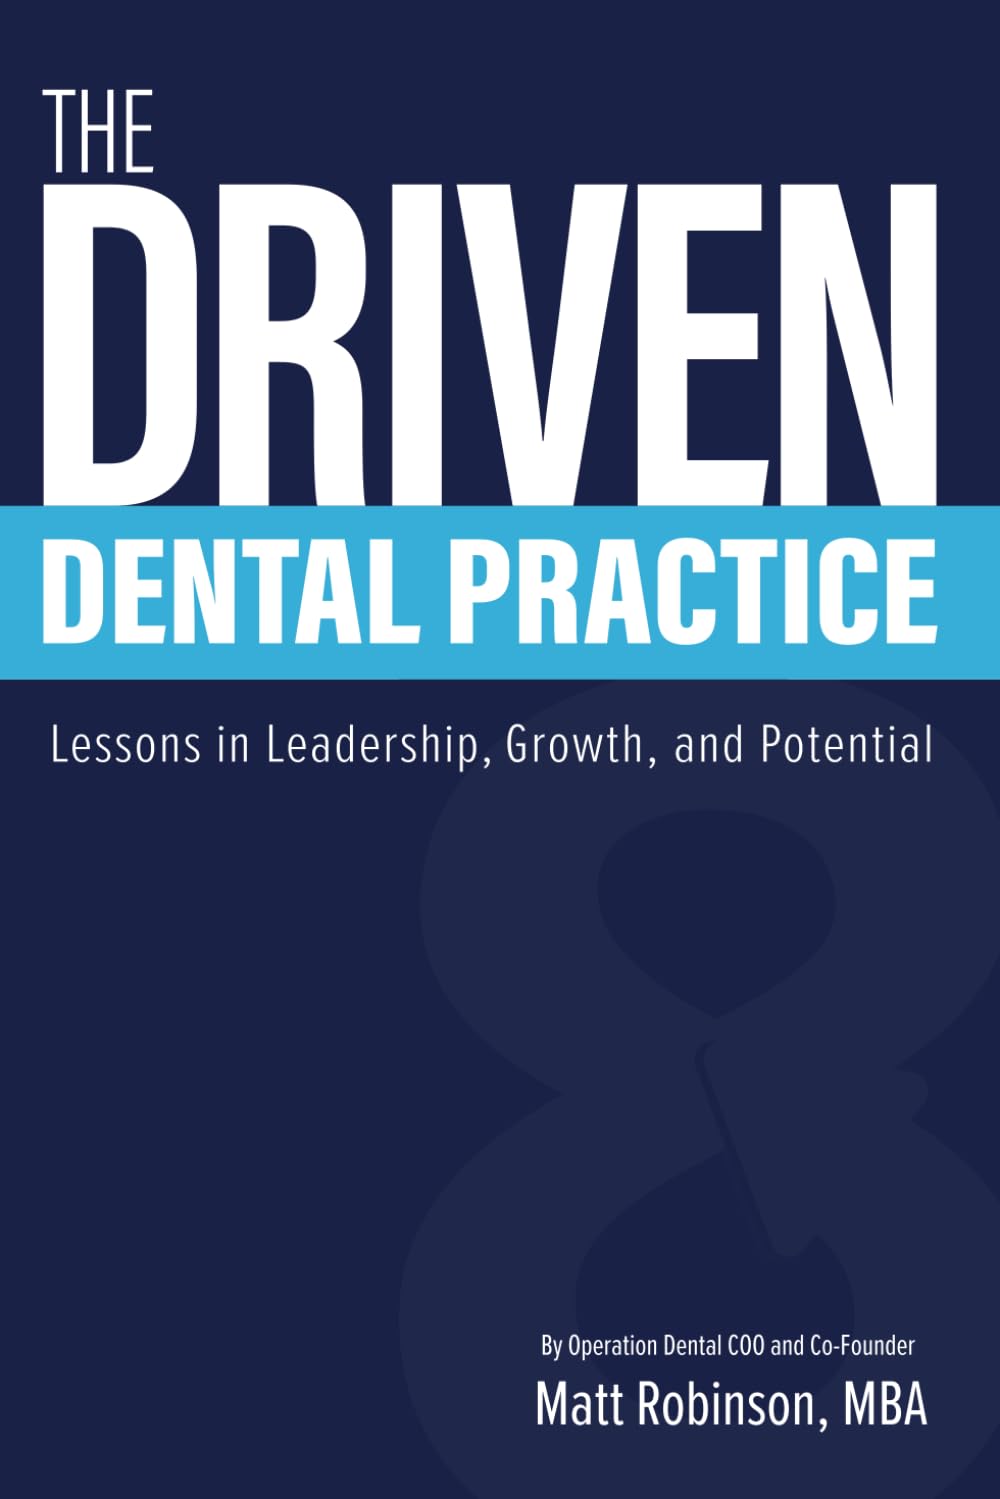 The Driven Dental Practice: Lessons in Leadership, Growth, and Potential